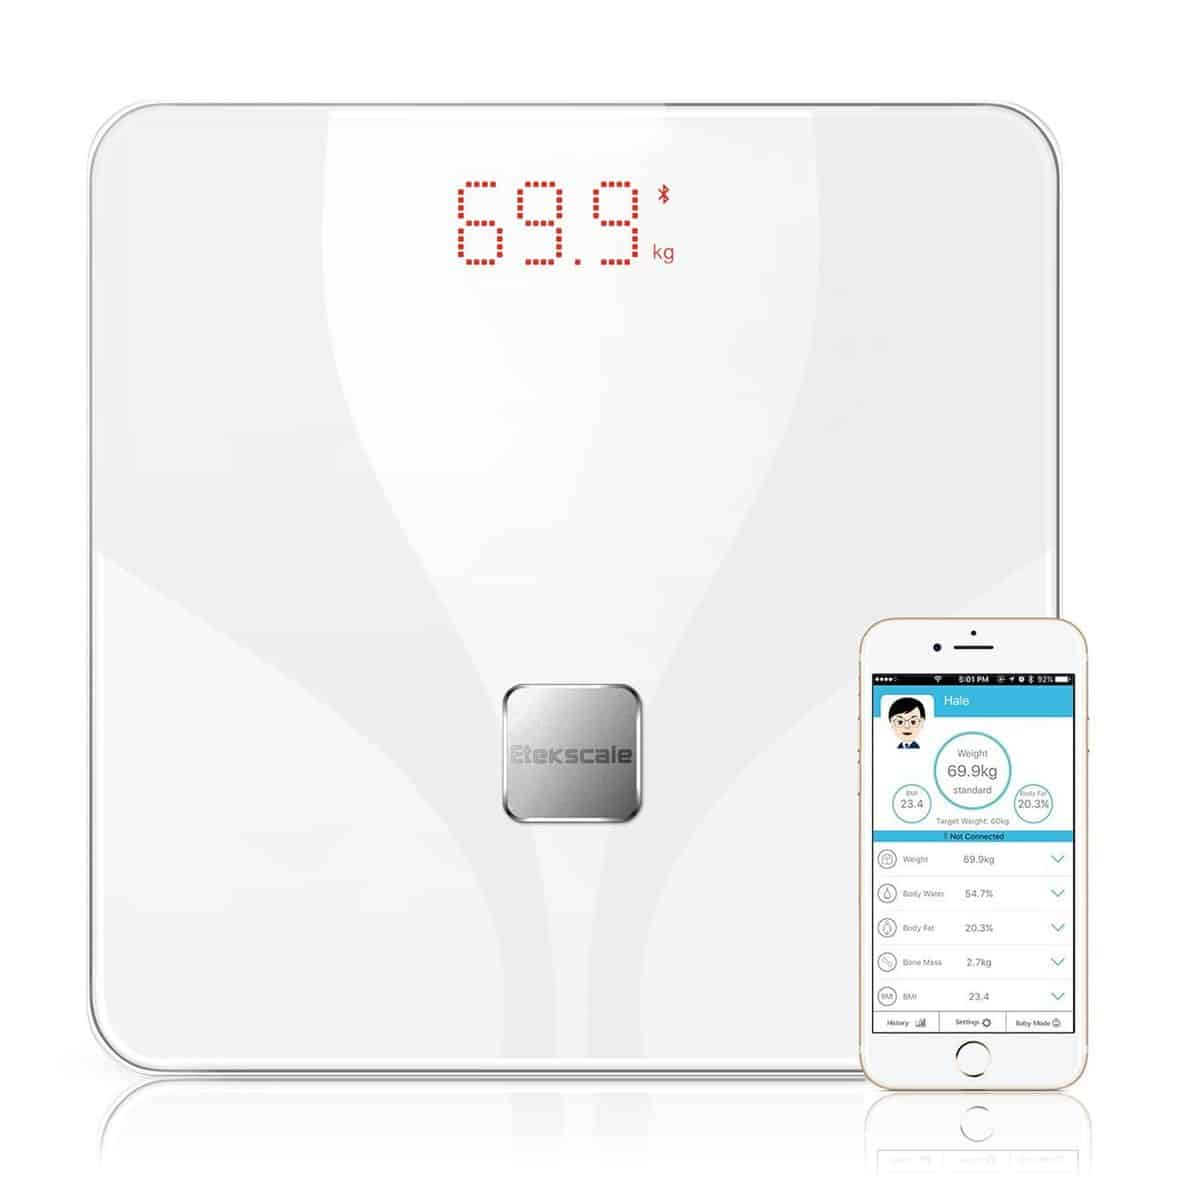 - Etekscale Bluetooth Body Fat Scale Review